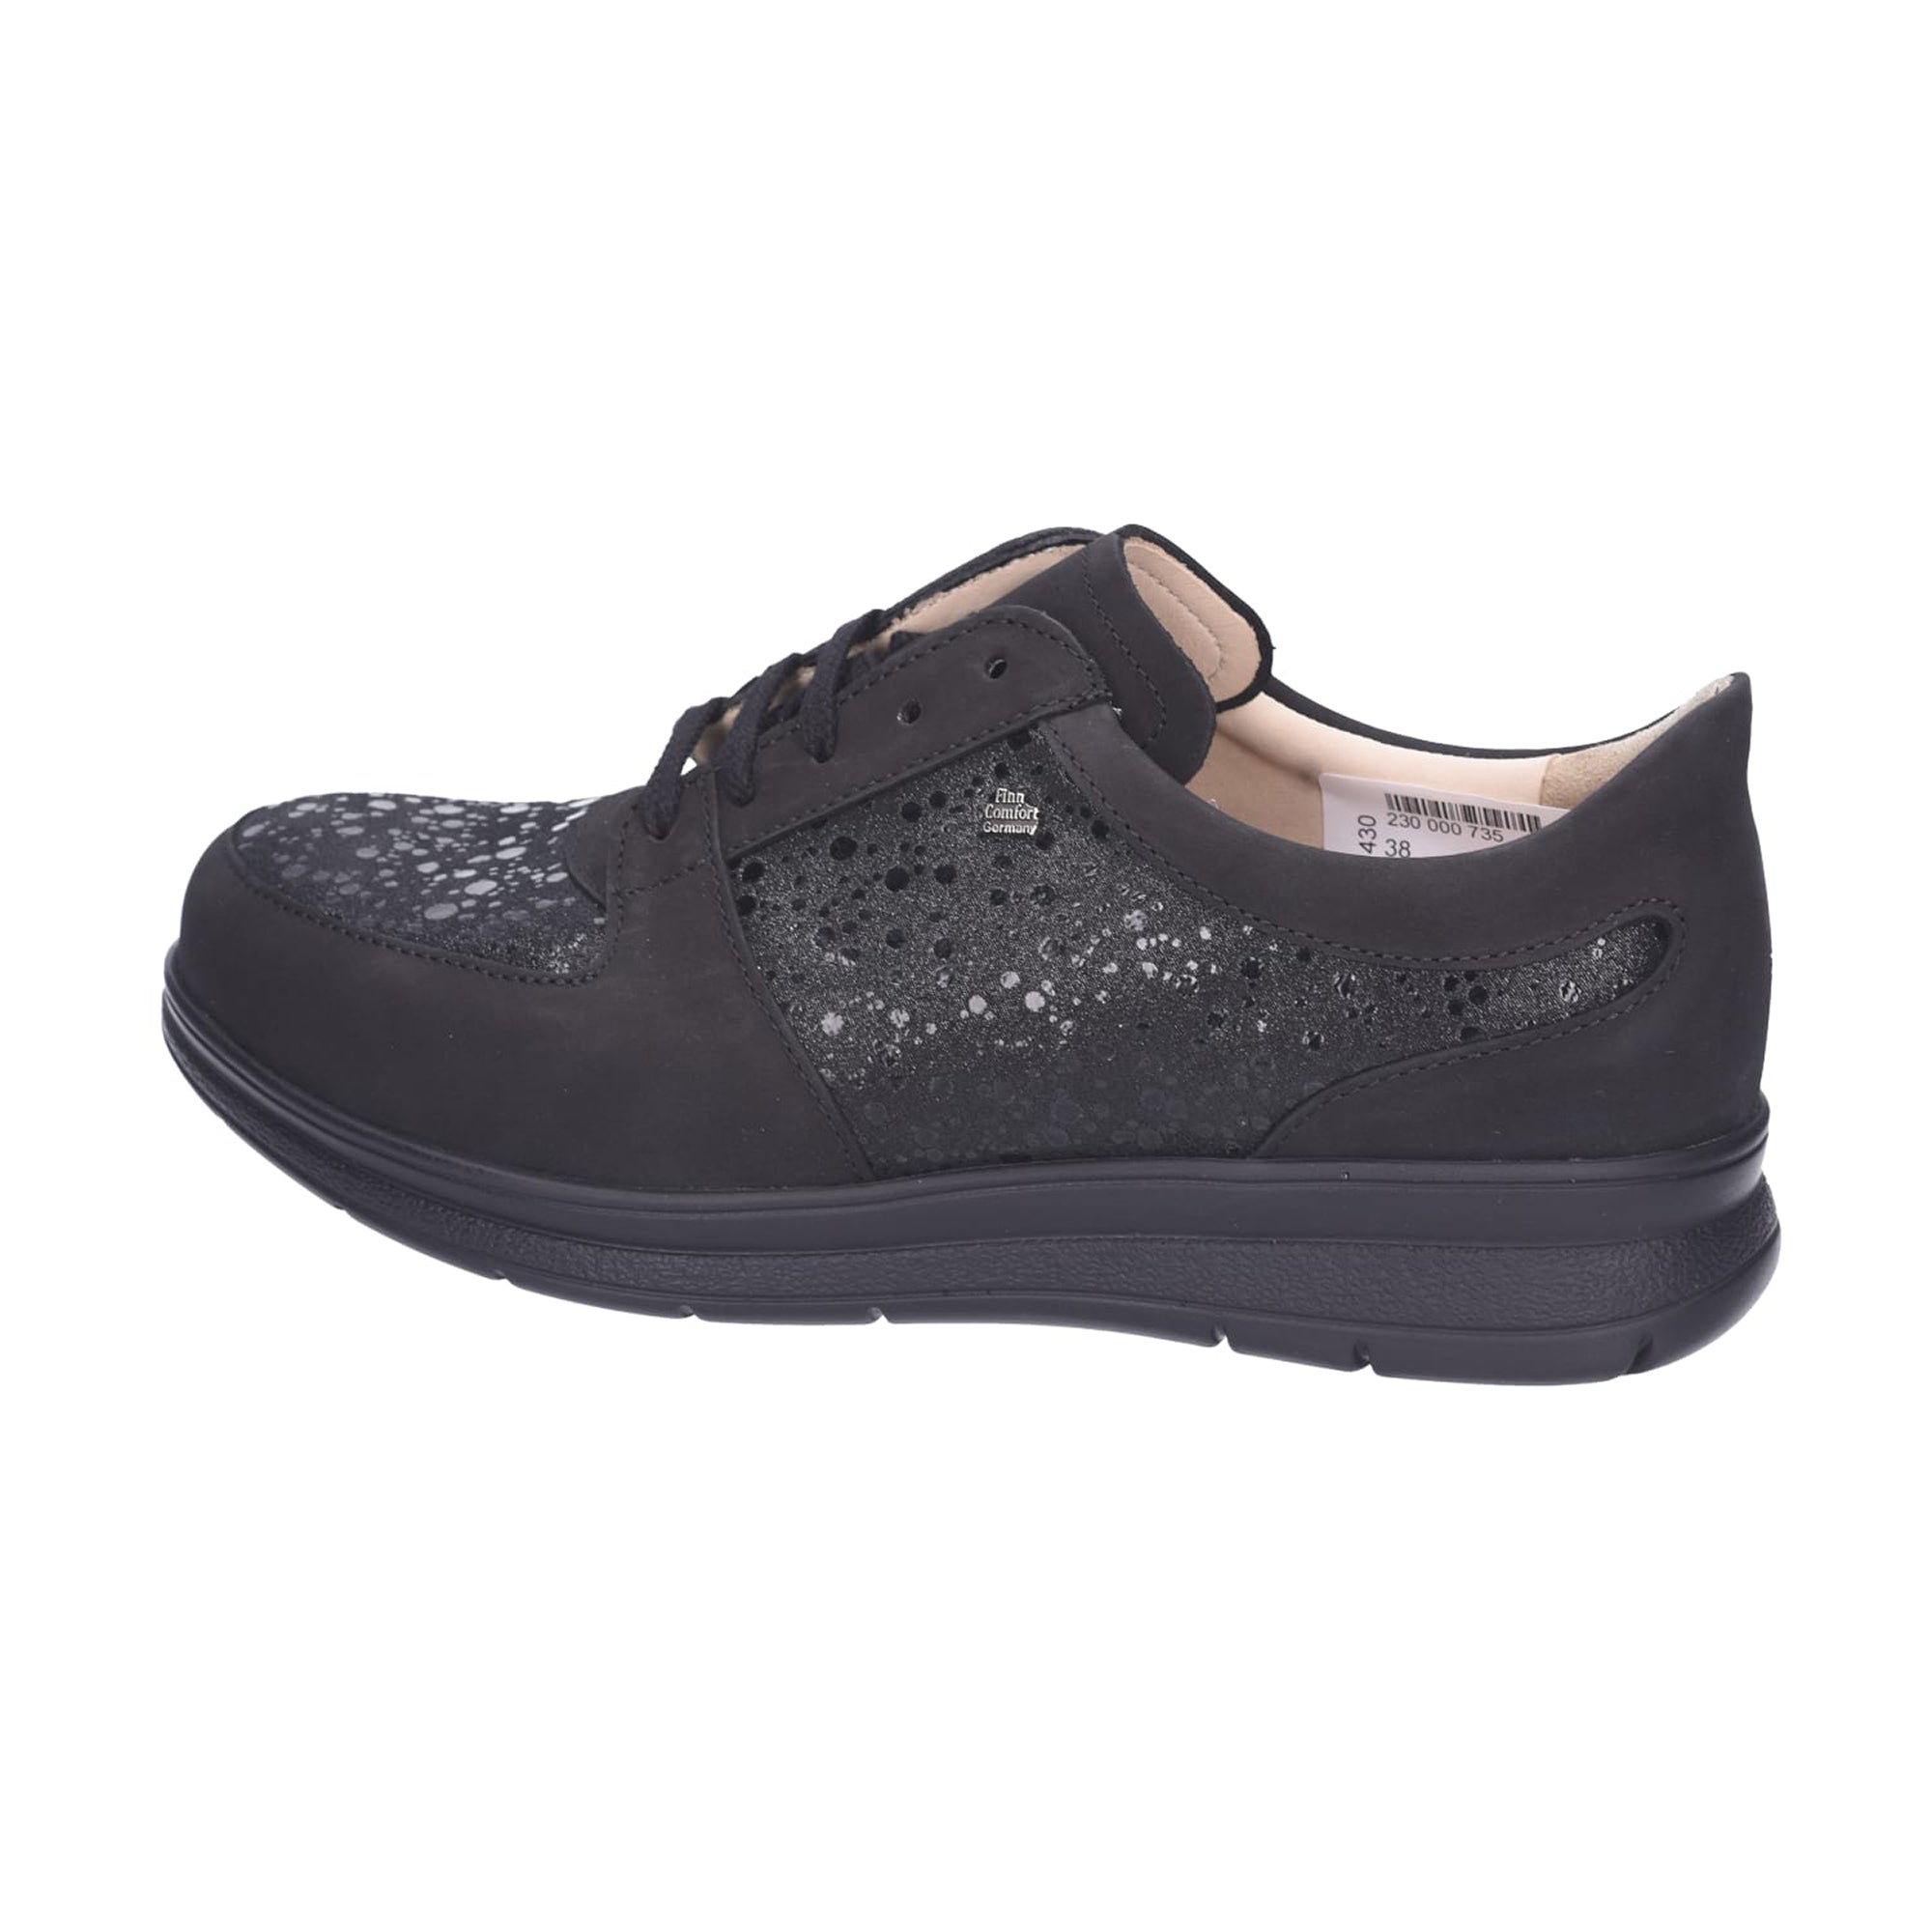 Finn Comfort Women's Black Lace-Up Shoes with Removable Insoles